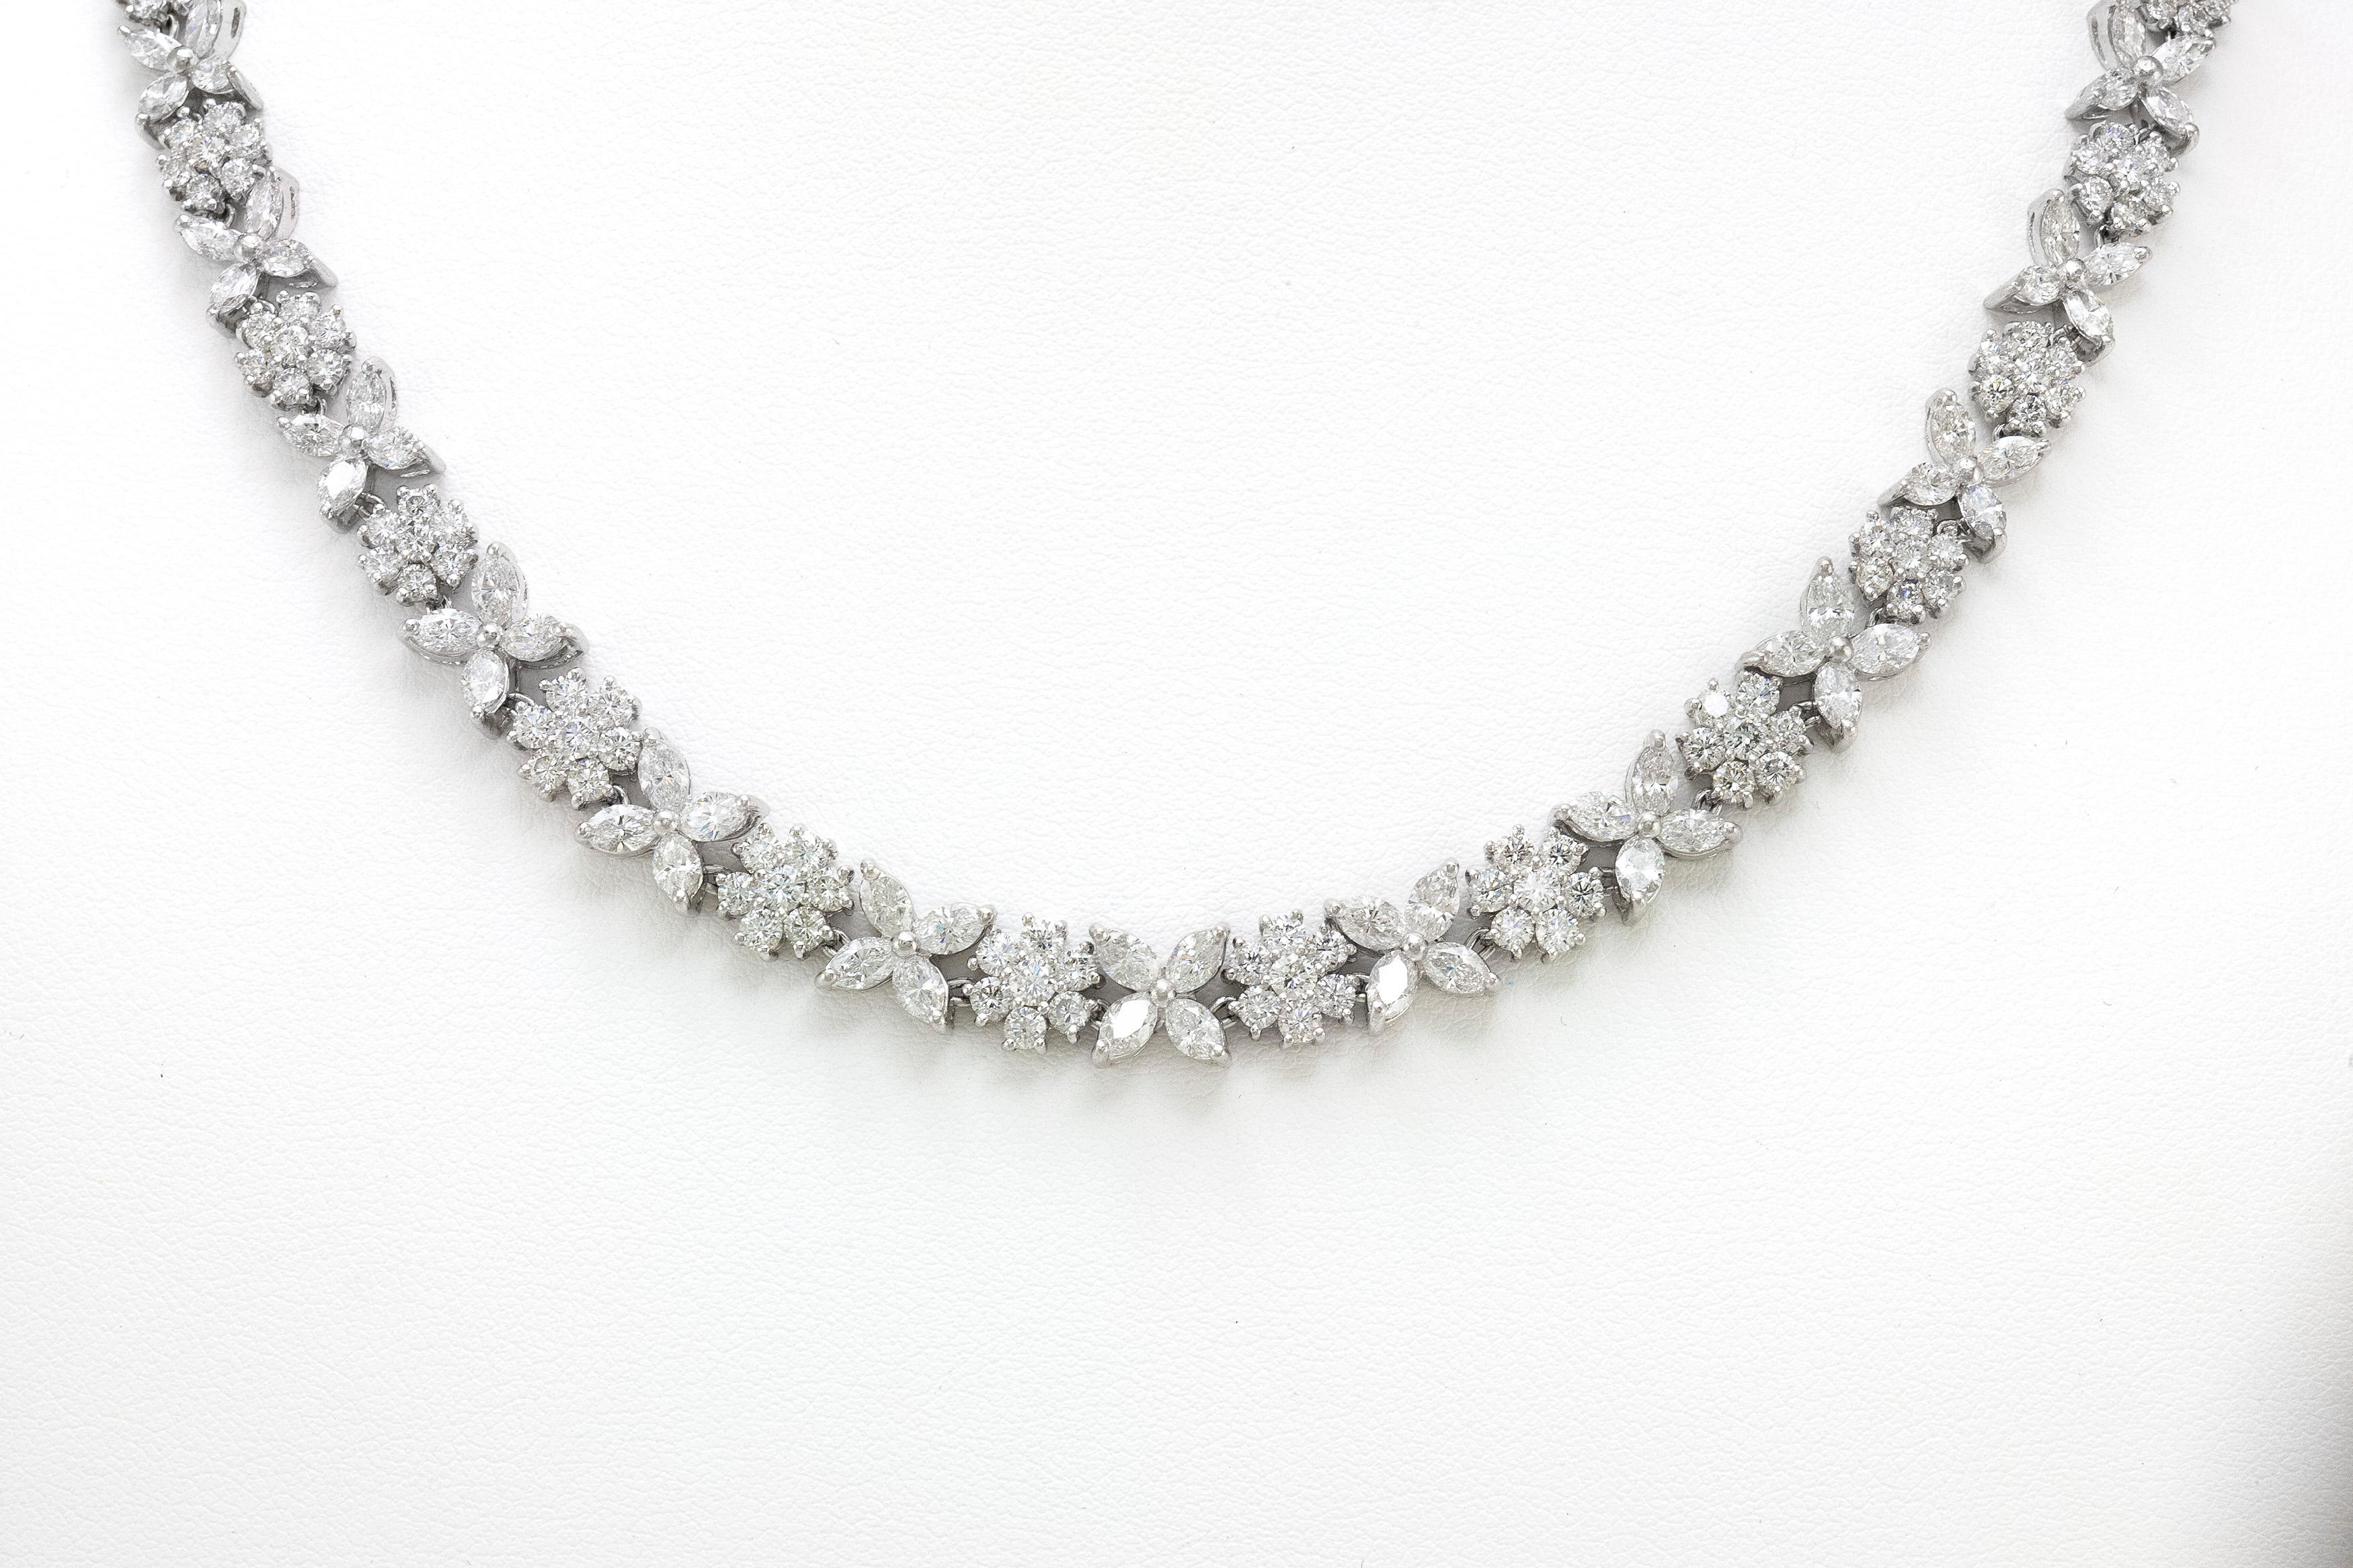 Finely crafted in platinum with round and marquise cut diamonds weighing a total of 18.56 carats.
16 1/2 inches long